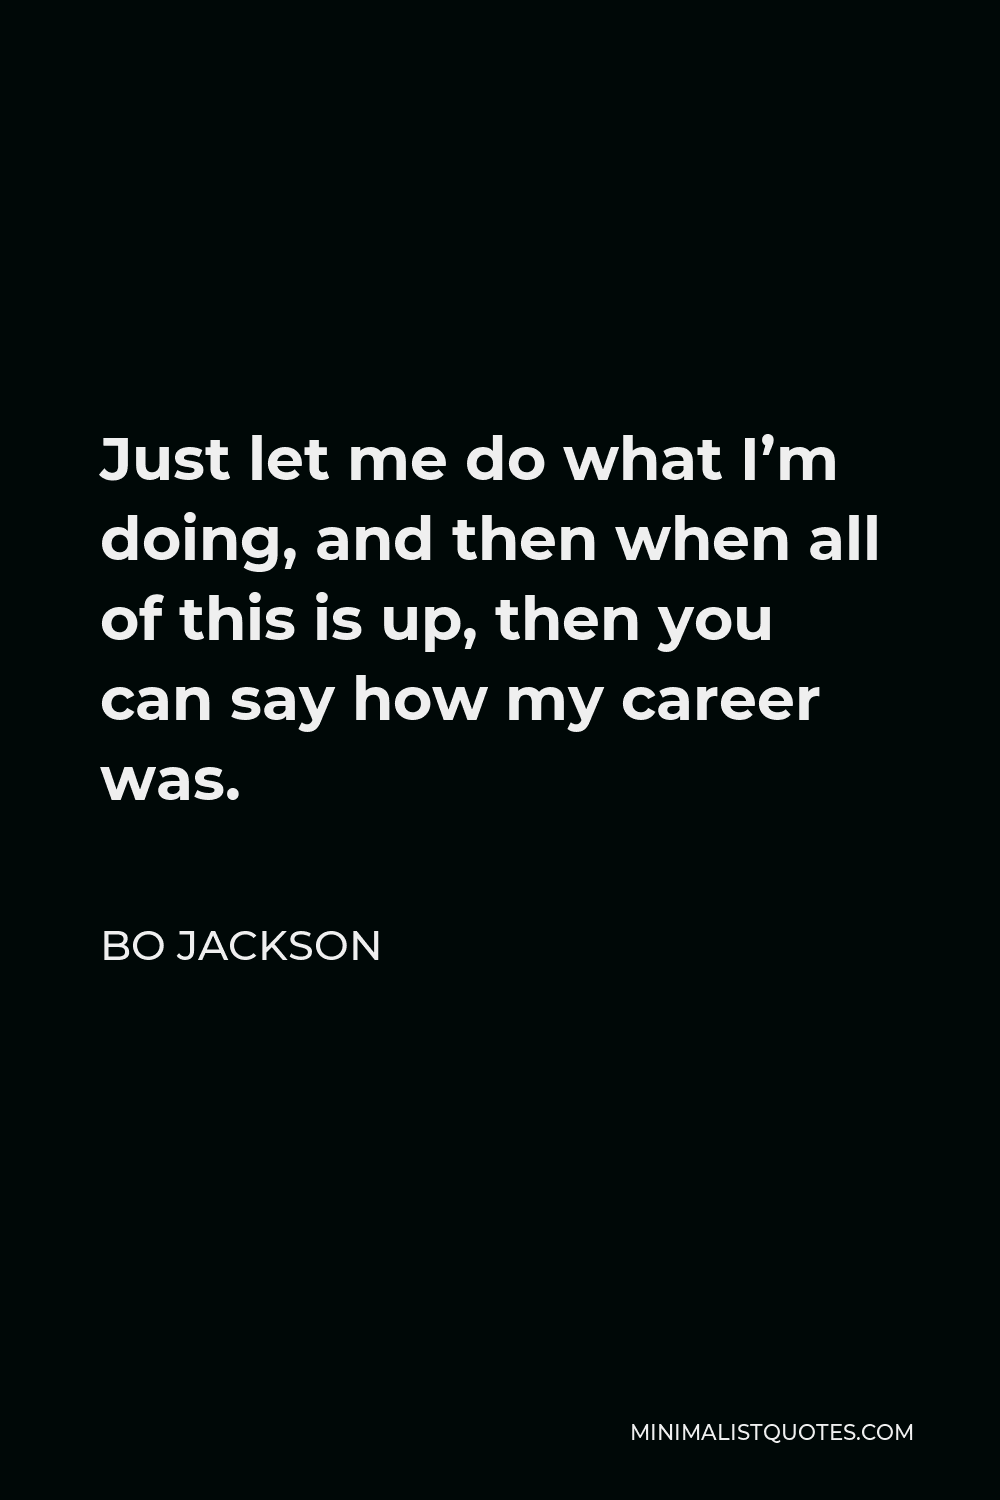 Bo Jackson Quote - Just let me do what I’m doing, and then when all of this is up, then you can say how my career was.